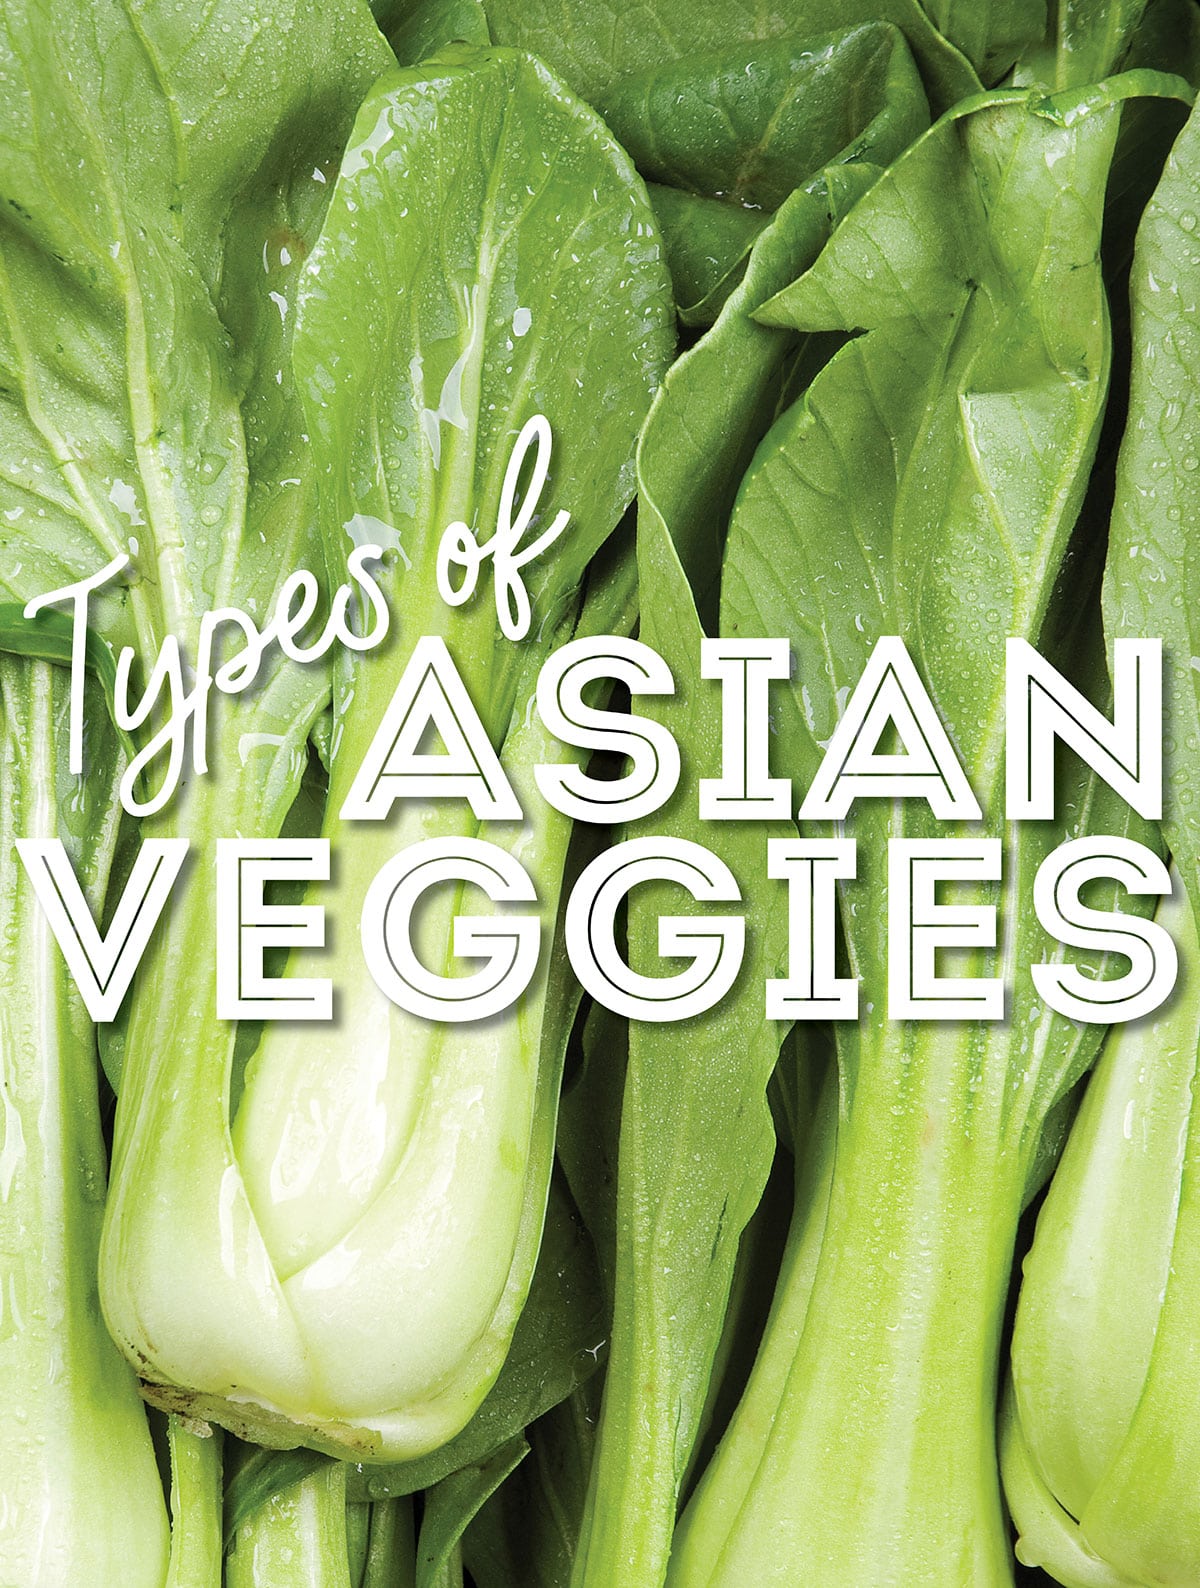 Collage that says "types of asian vegetables".